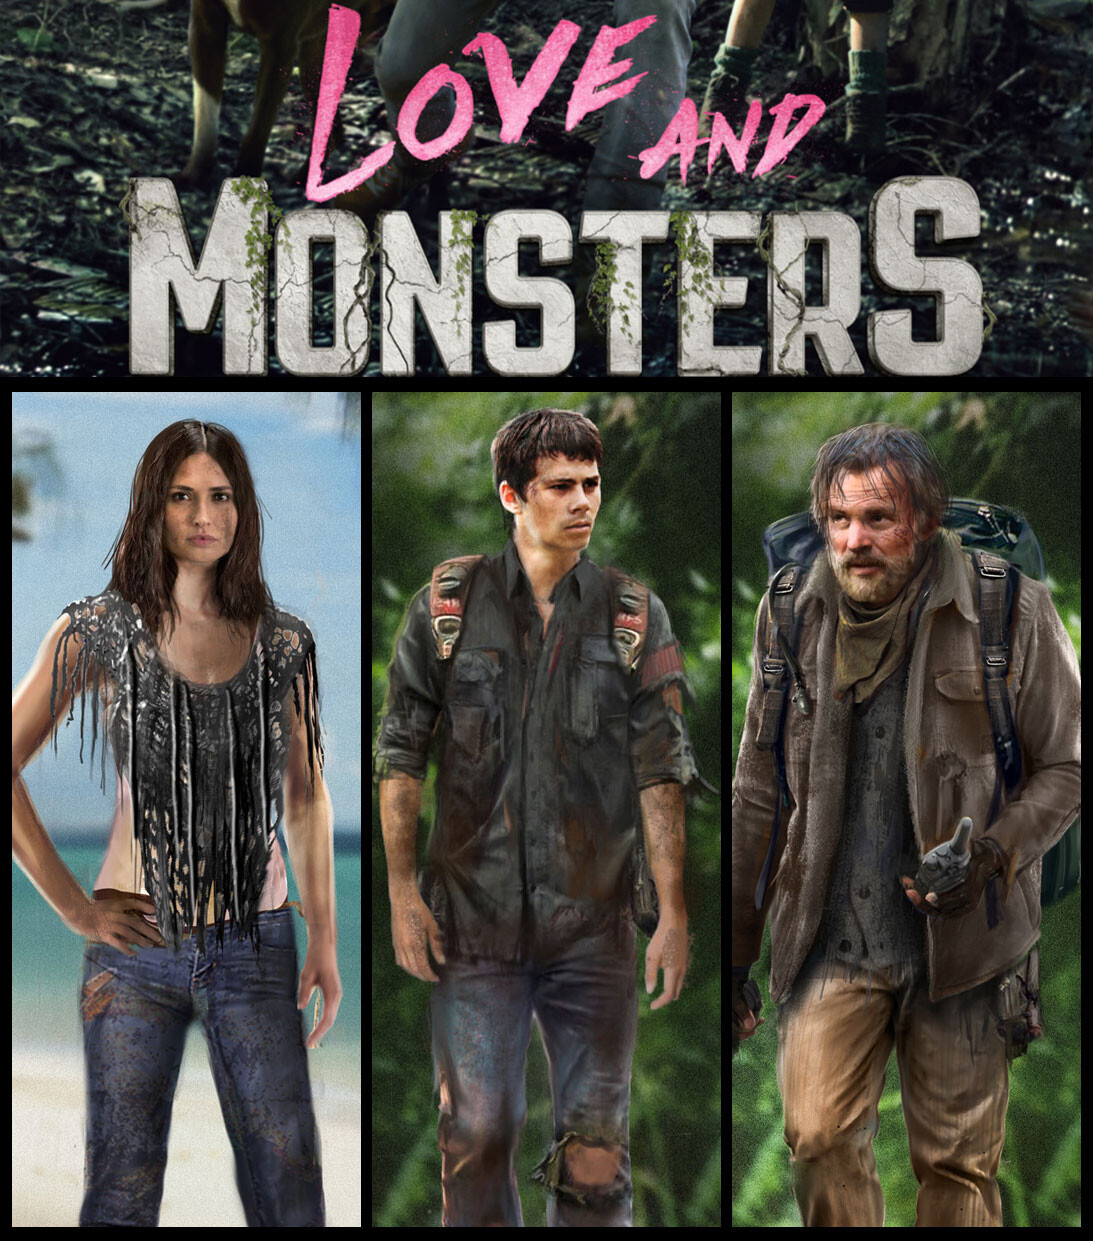 LOVE AND MONSTERS COSTUMES